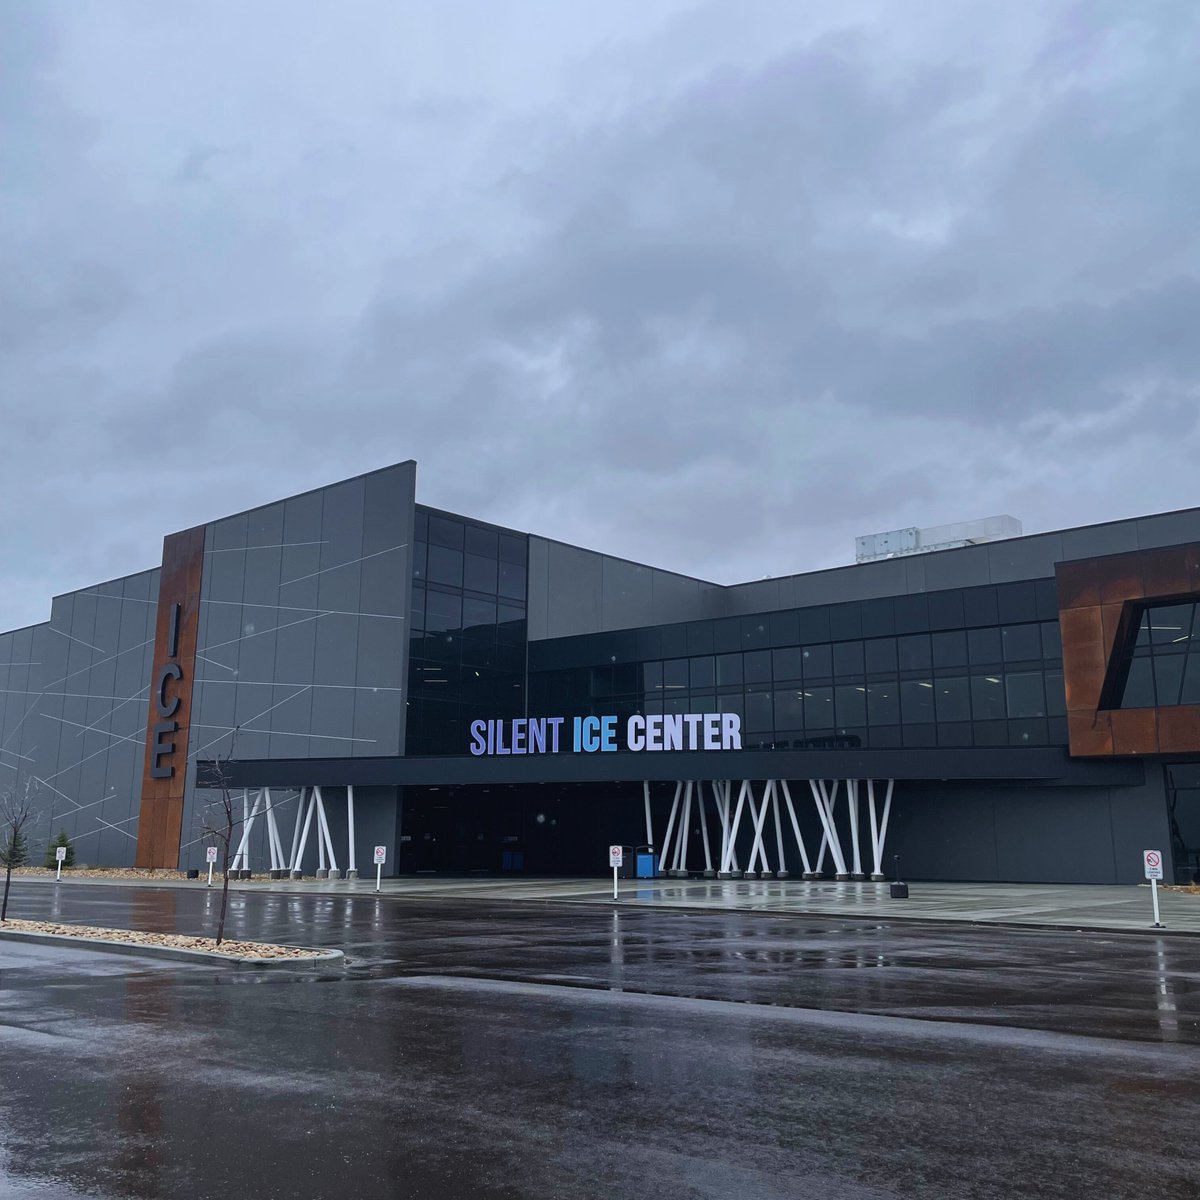 May has been a rainy one for Nisku - but inside our premium facility, the action is non-stop! 🏒 #SkateSIC #SilentIceCenter #Niskuab #yegicerinks #summerskatingyeg